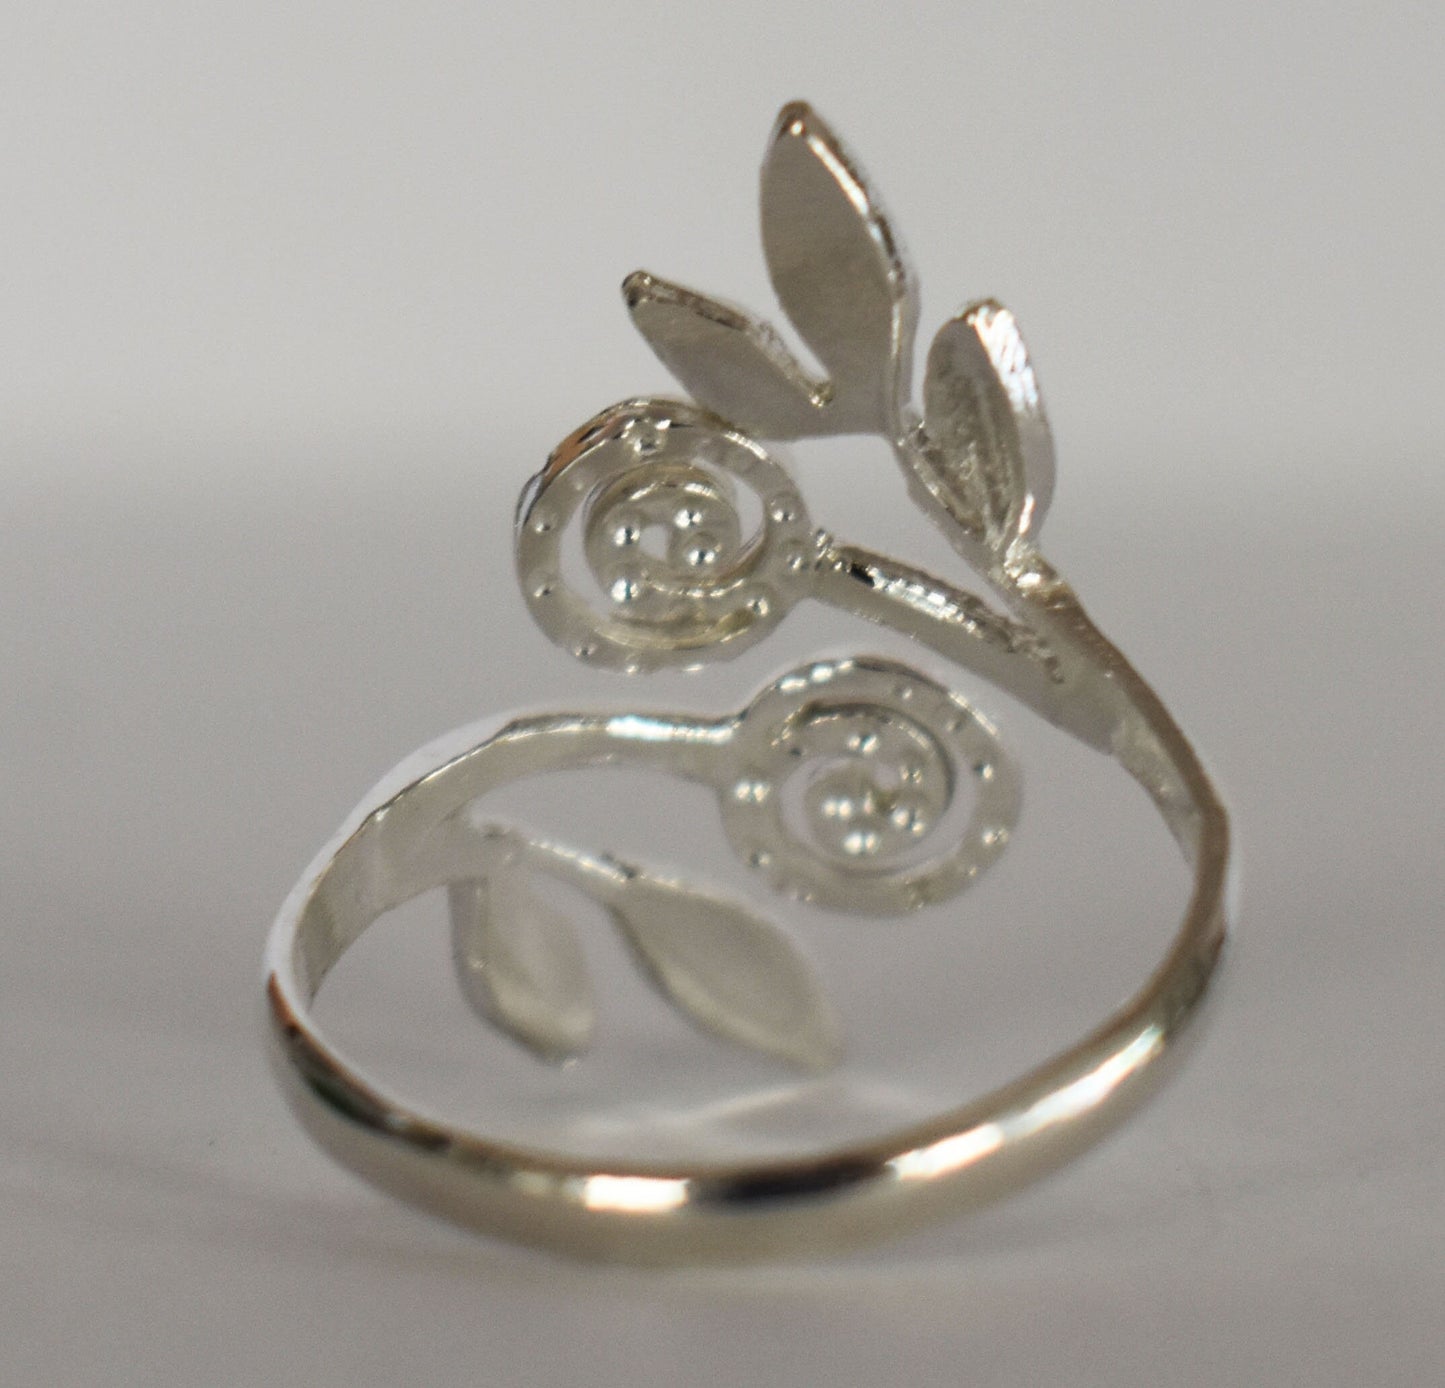 Olive Branch - Ancient Greek Symbol of Peace and Victory - Olympic Games Prize - Ring - One Size - 925 Sterling Silver